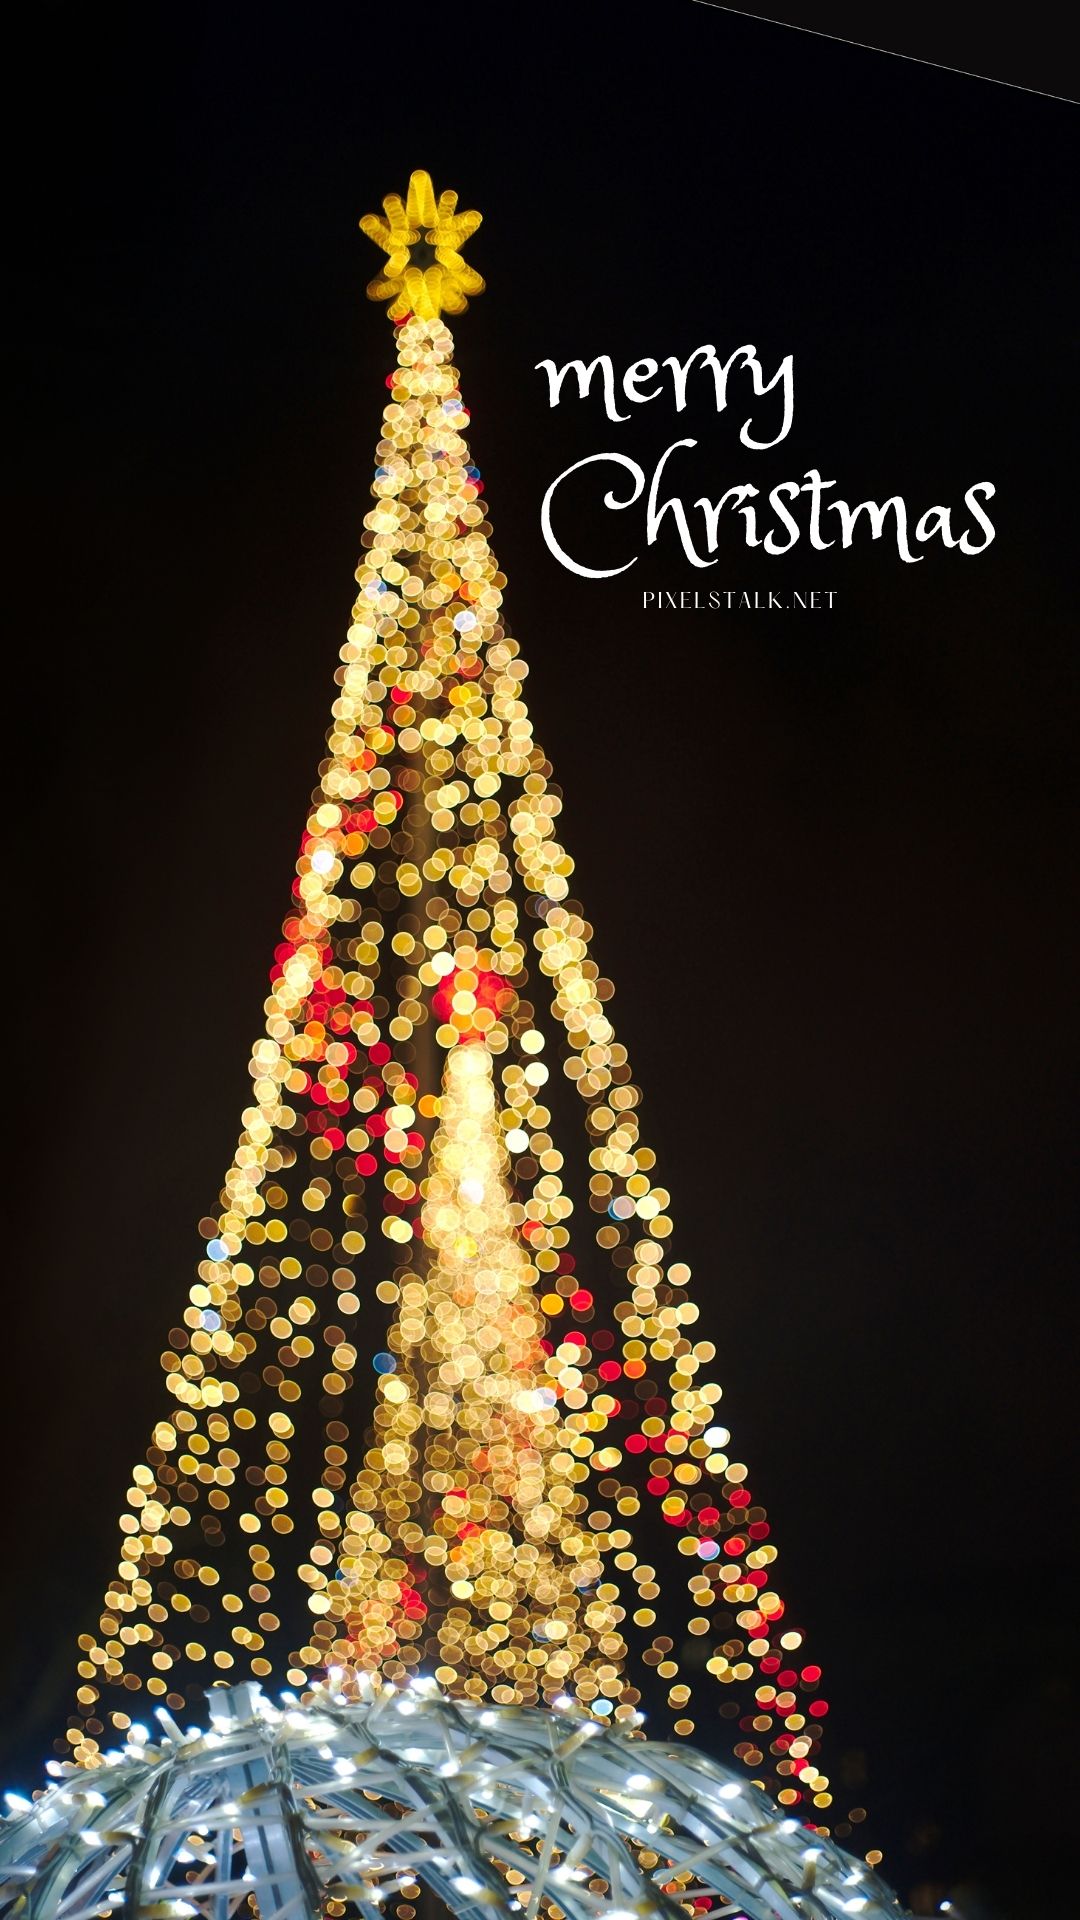 Merry Christmas Iphone Wallpapers